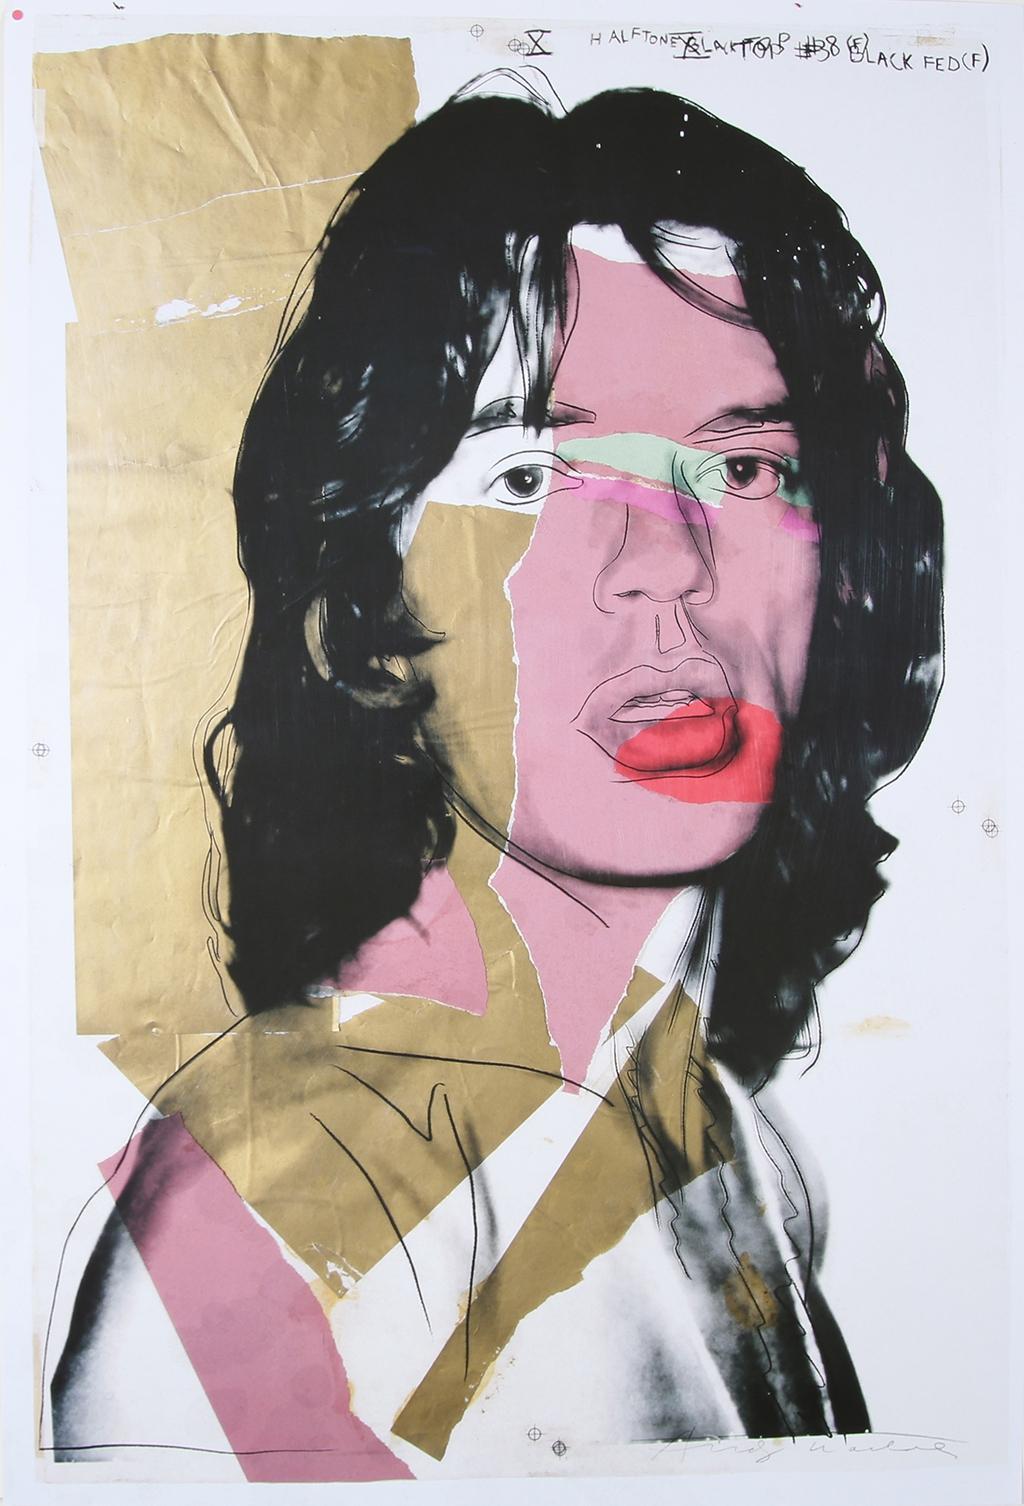 Andy Warhol - "Mick Jagger".

Limited Edition.

Publisher is MUMOK in Vienna.

Signed in print.

Ready to hang with a black aluminium frame in 0.5 cm width and acrylic glass.

In excellent condition.

A beautiful artwork that looks good in every